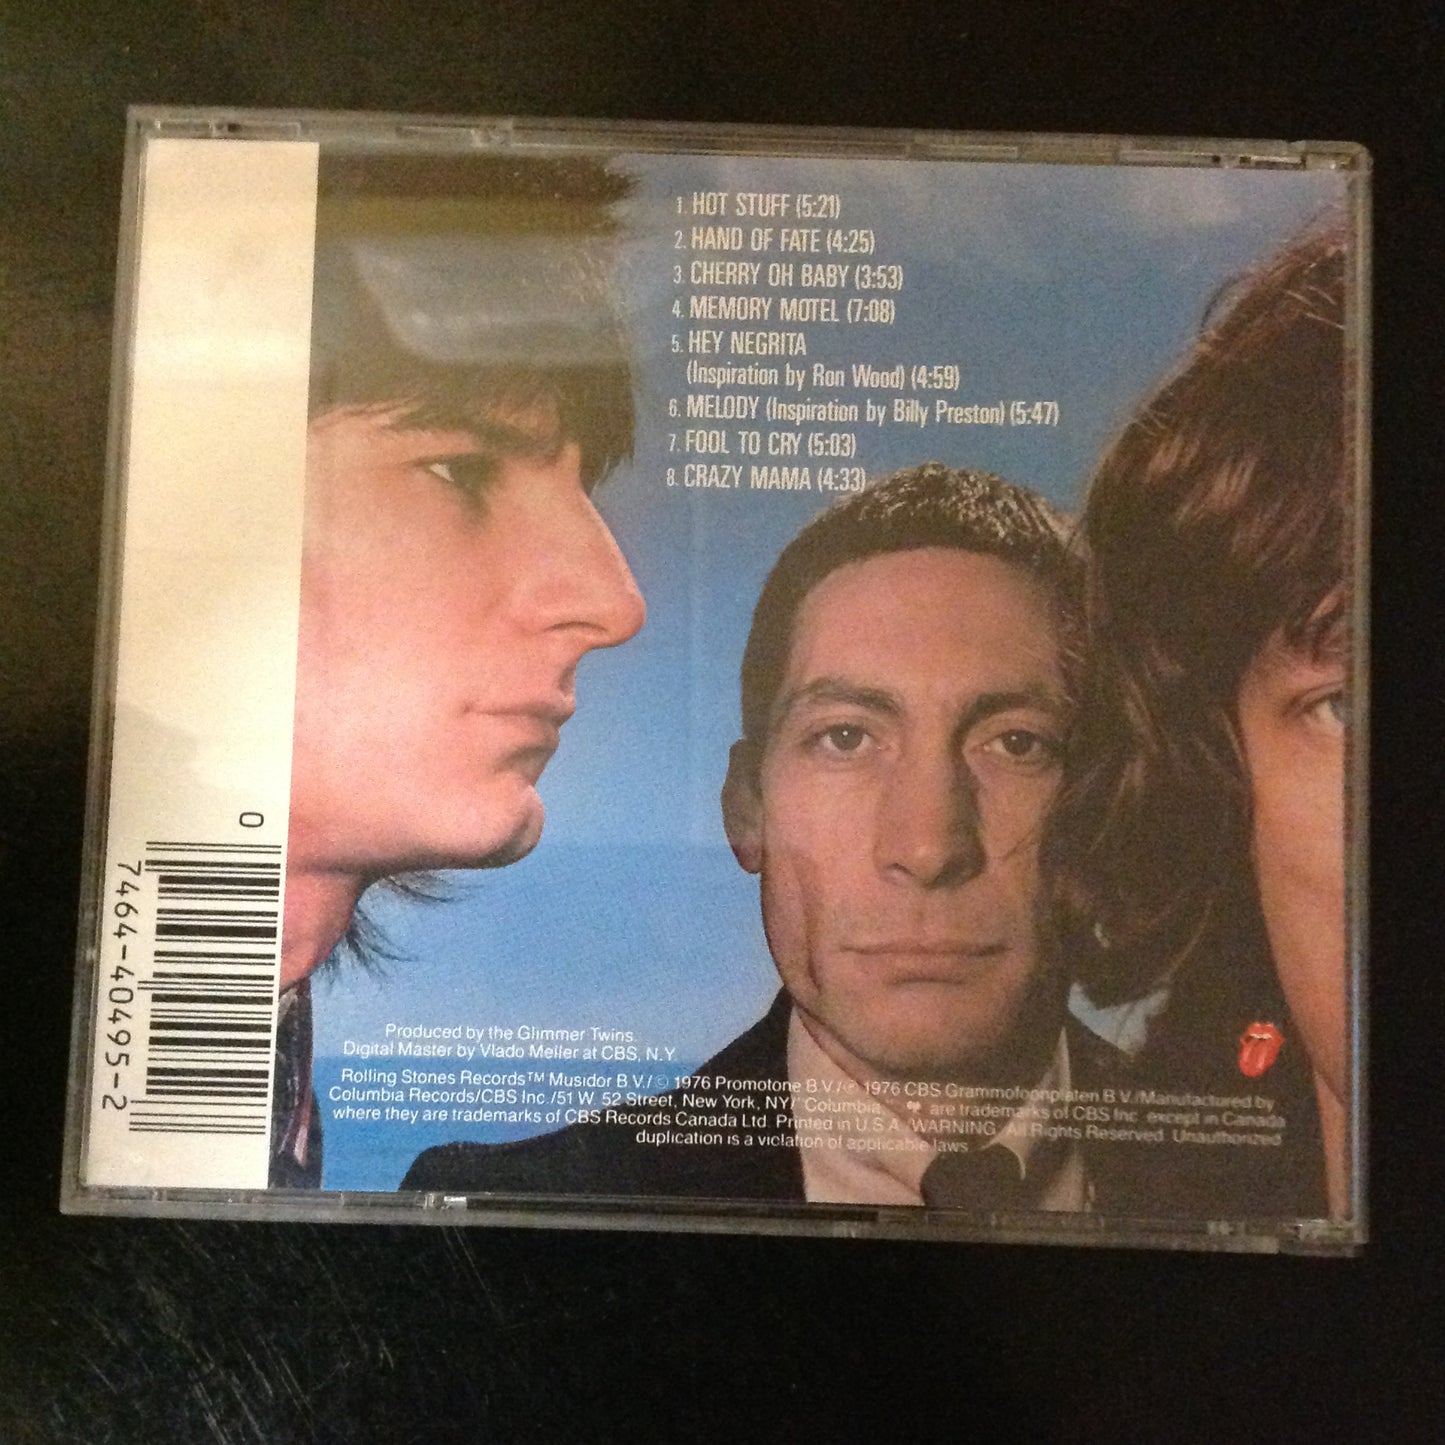 CD The Rolling Stones Black and Blue CK 40495 Rolling Stones Records